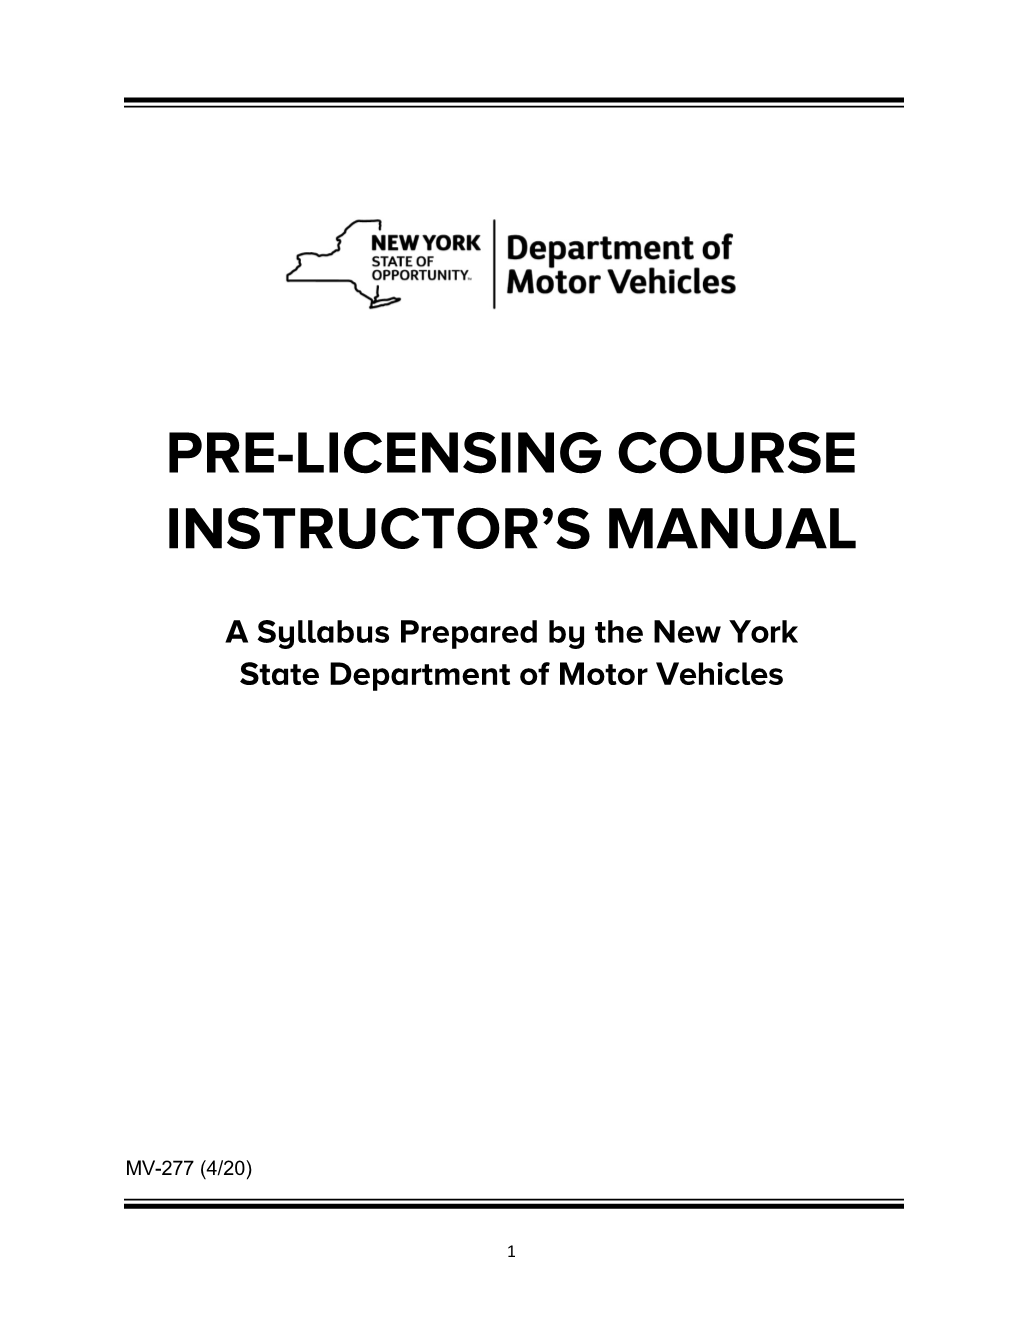 Pre-Licensing Course Instructor's Manual